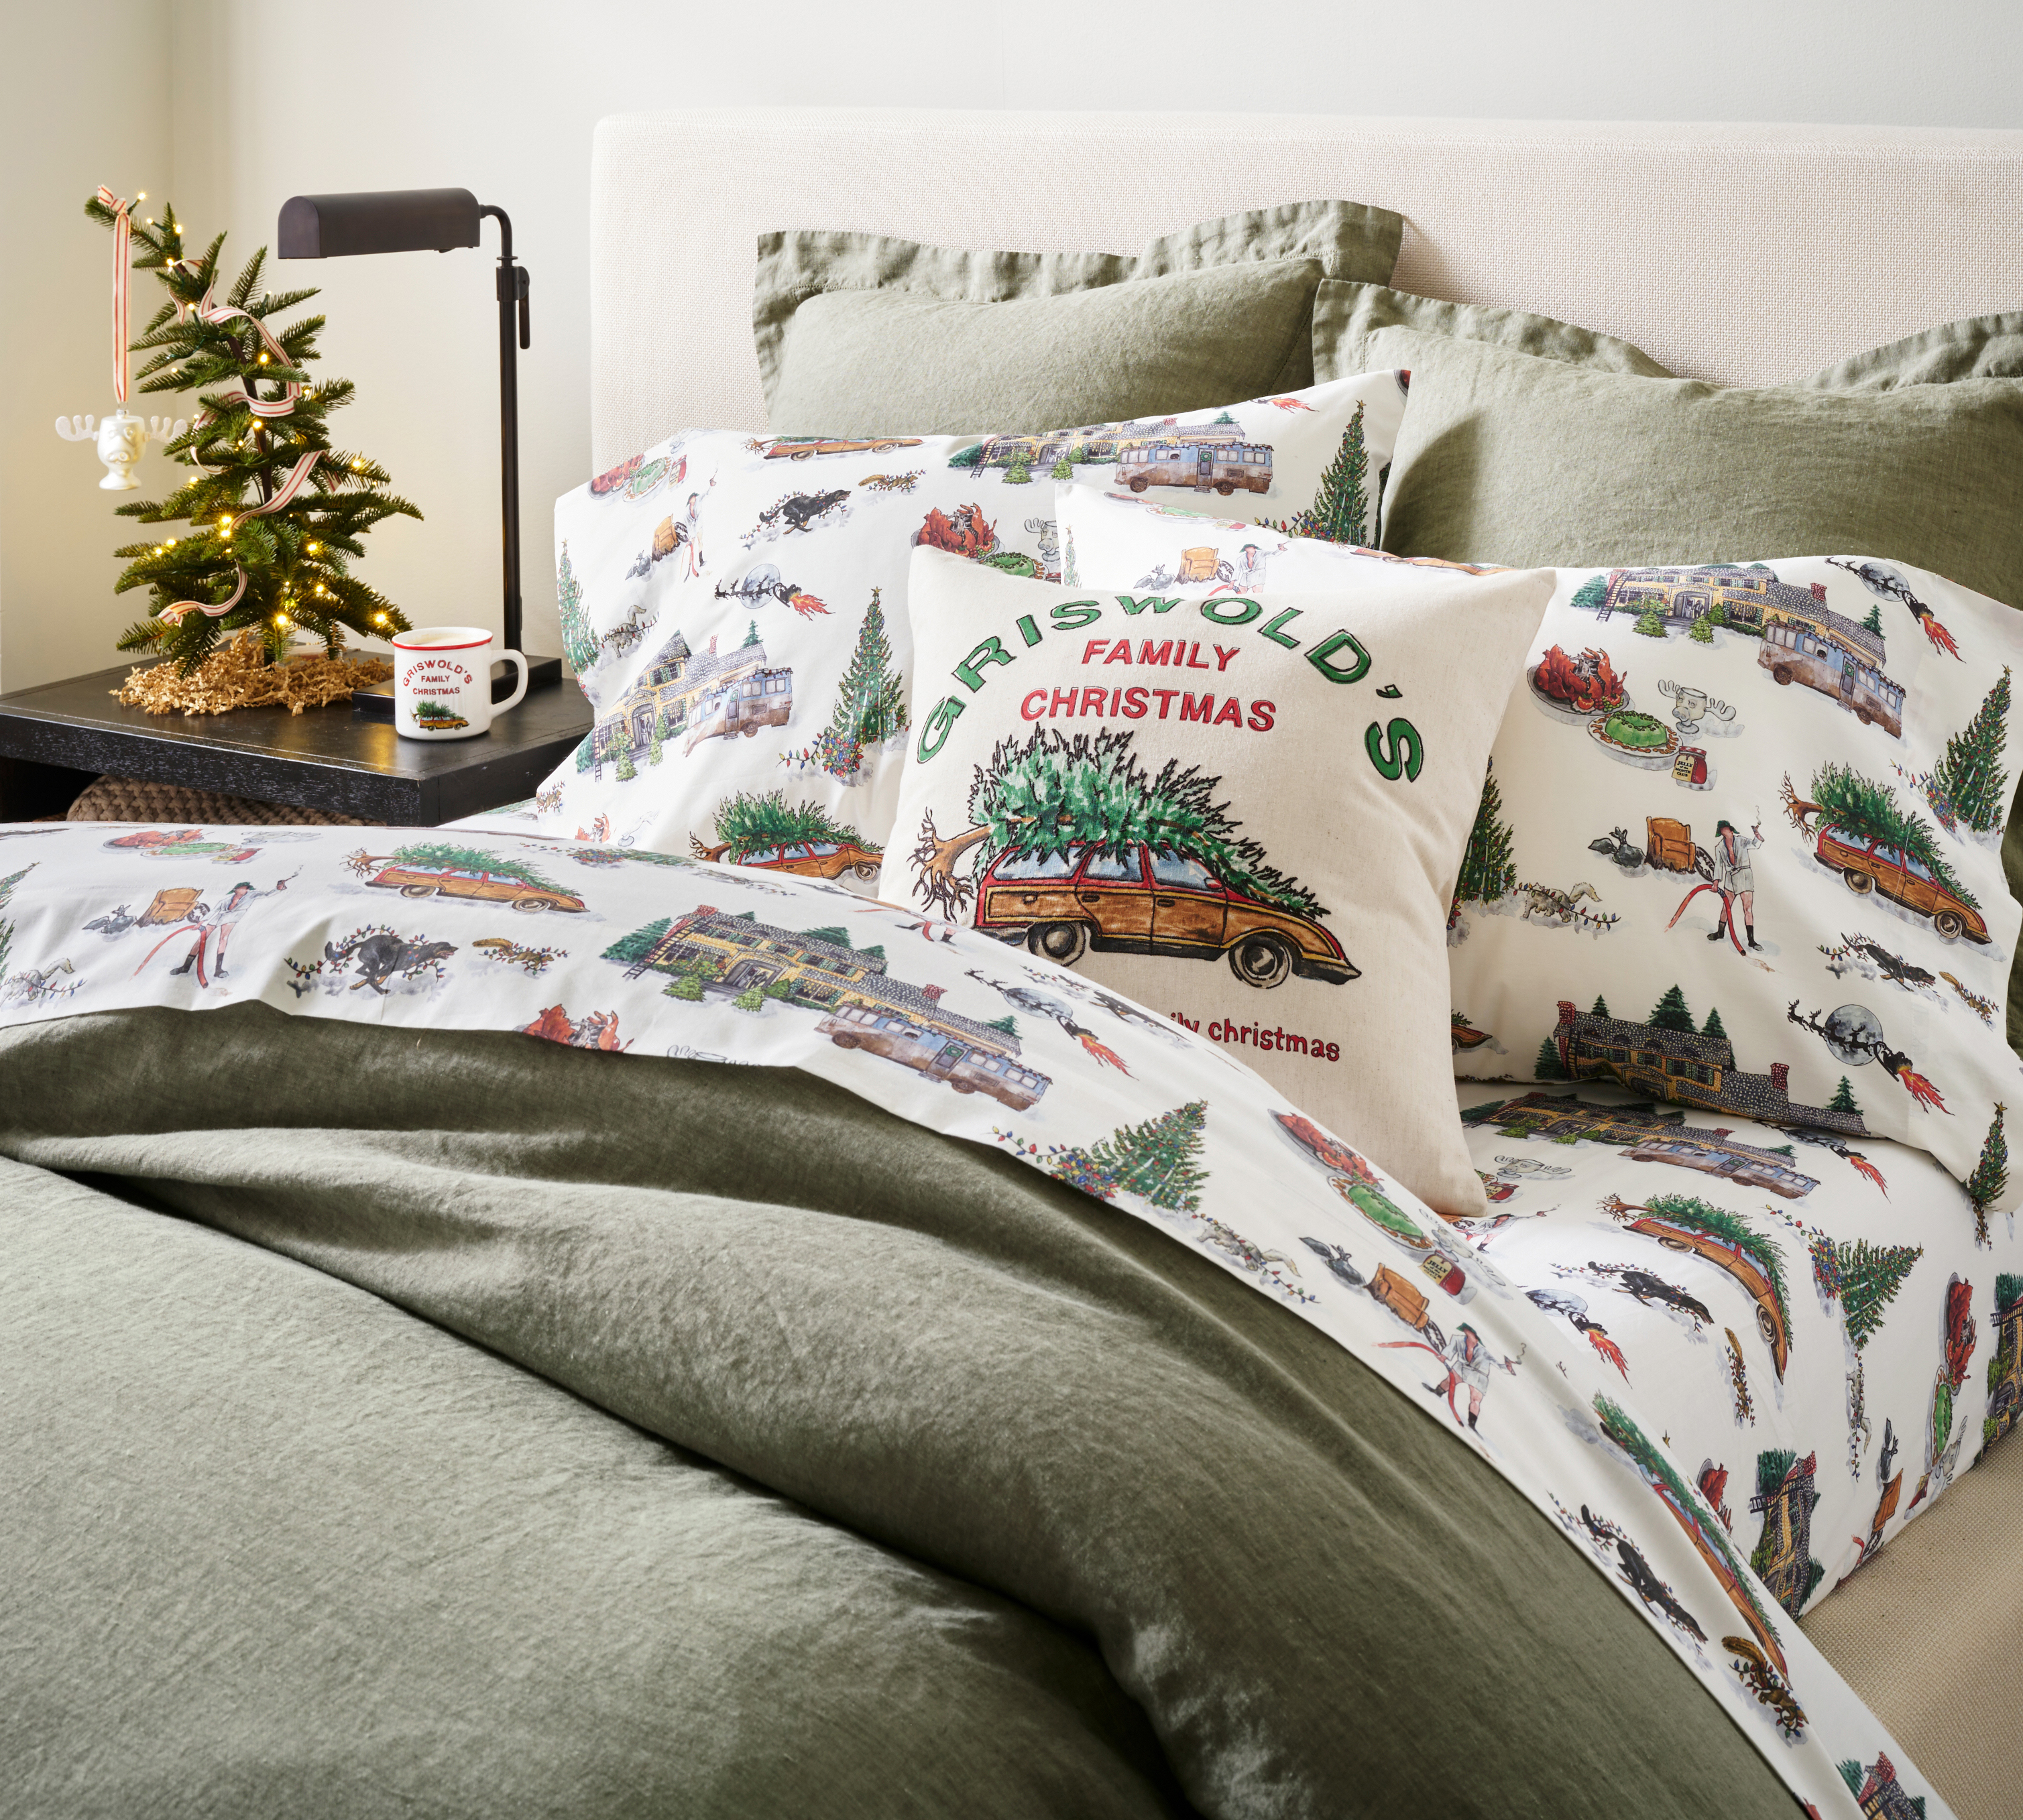 Bed Bath & Beyond Launches New Brand Dedicated to Holiday Decor